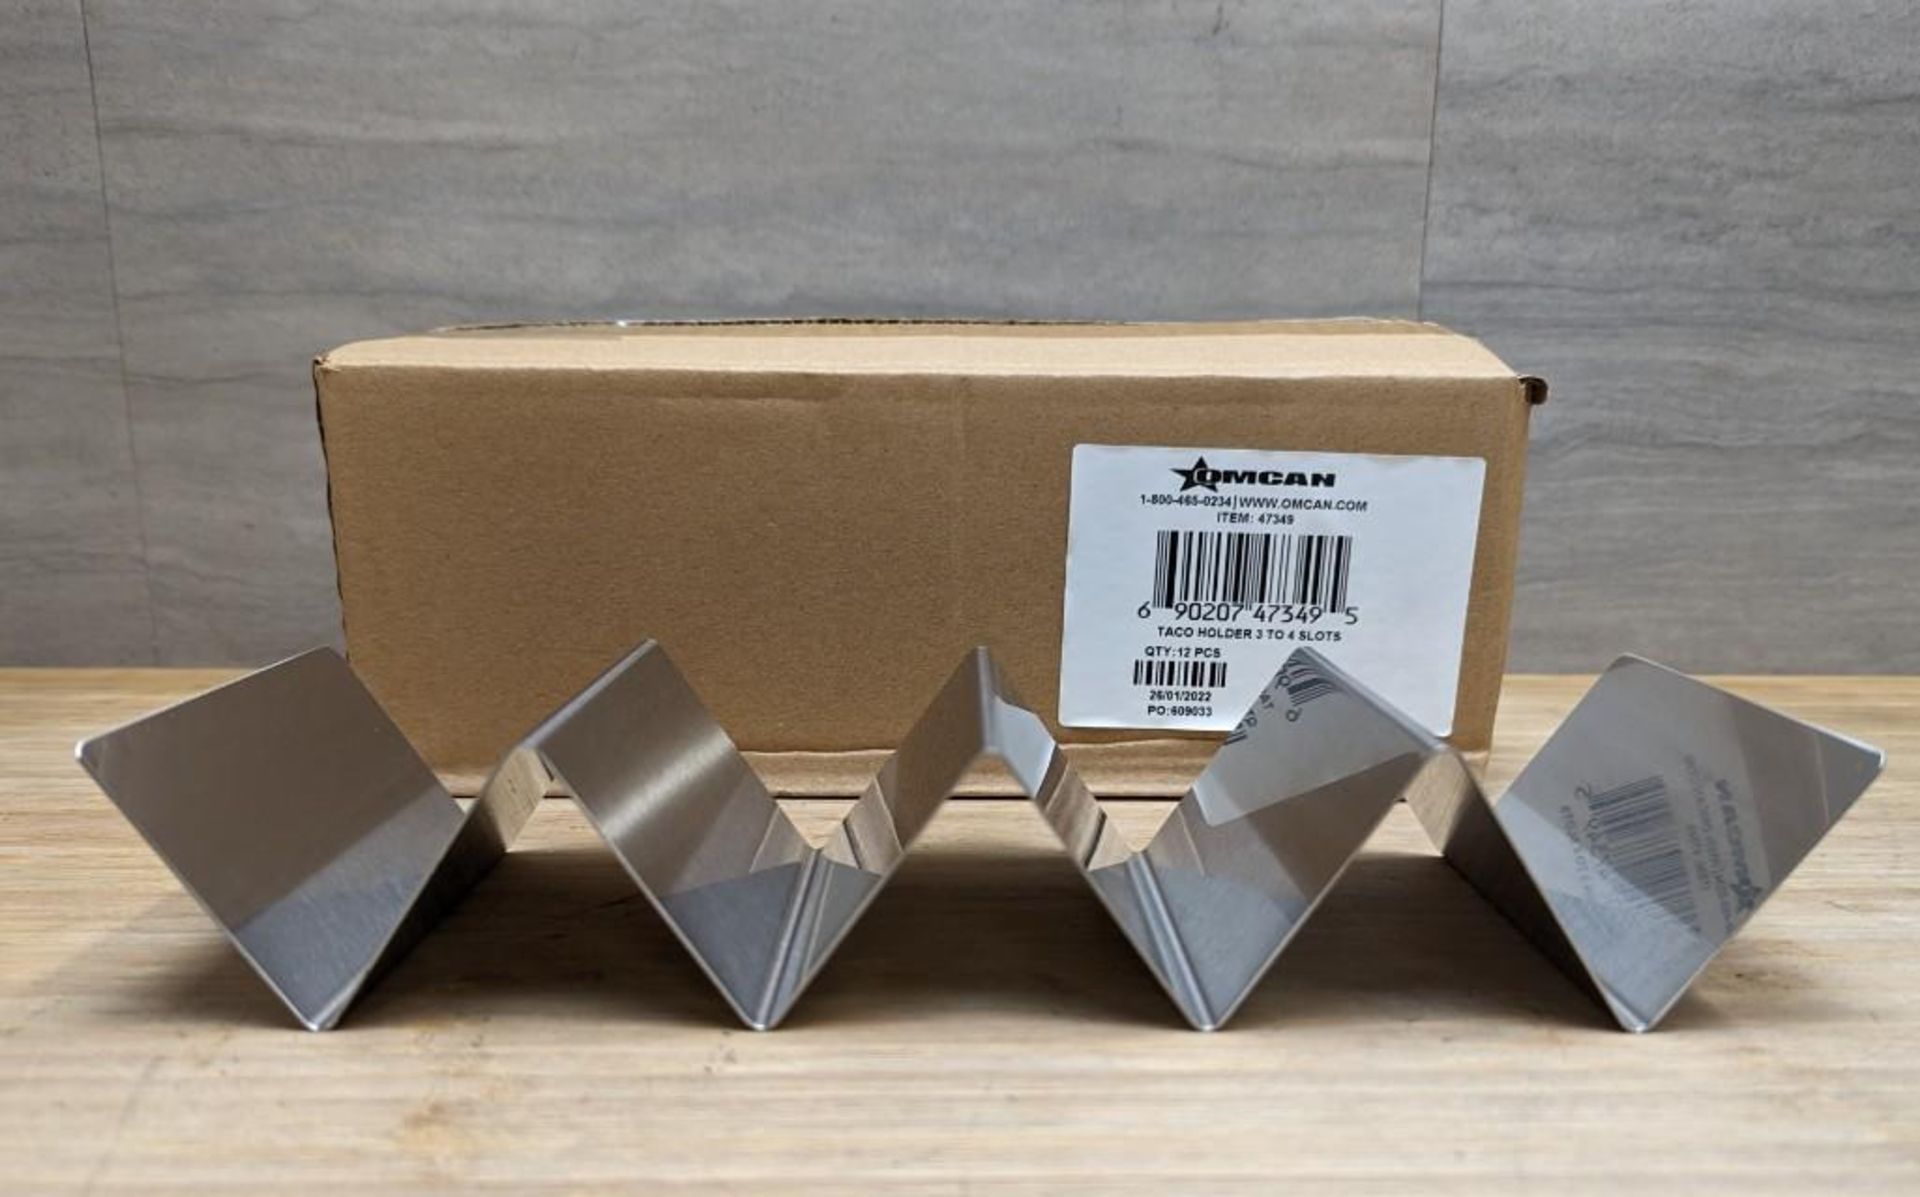 3 OR 4 SLOT STAINLESS TACO HOLDERS, OMCAN 47349 - LOT OF 12 - NEW